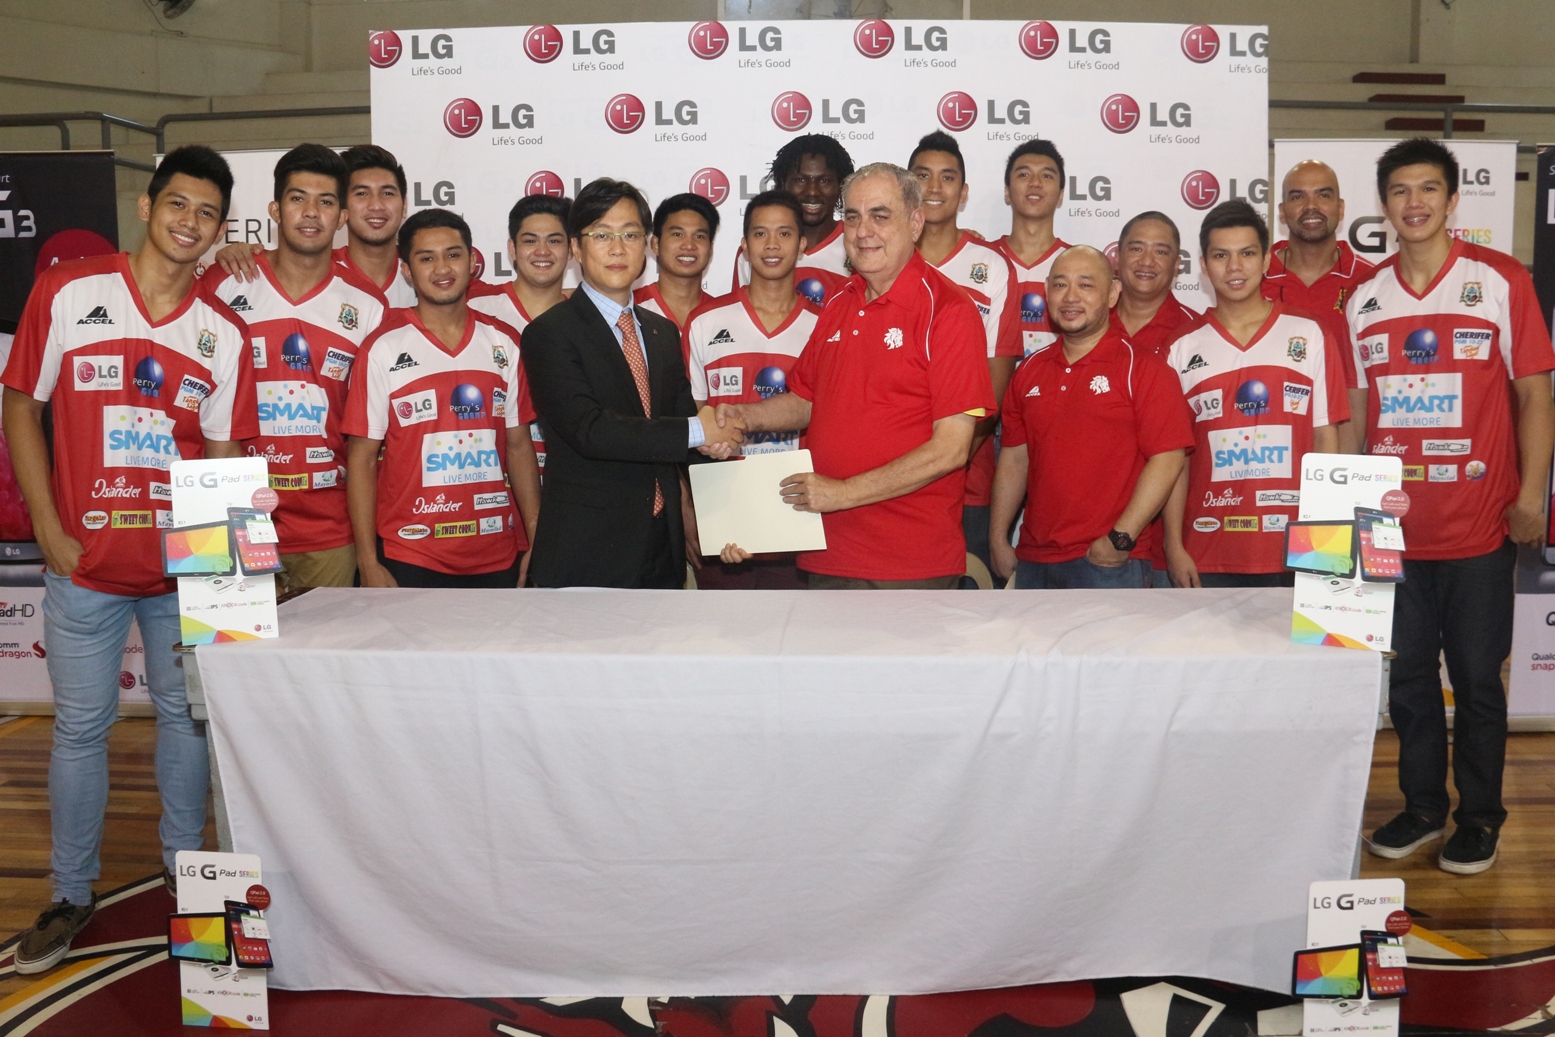 San Beda Red Lions roar anew at NCAA with new LG G Pads